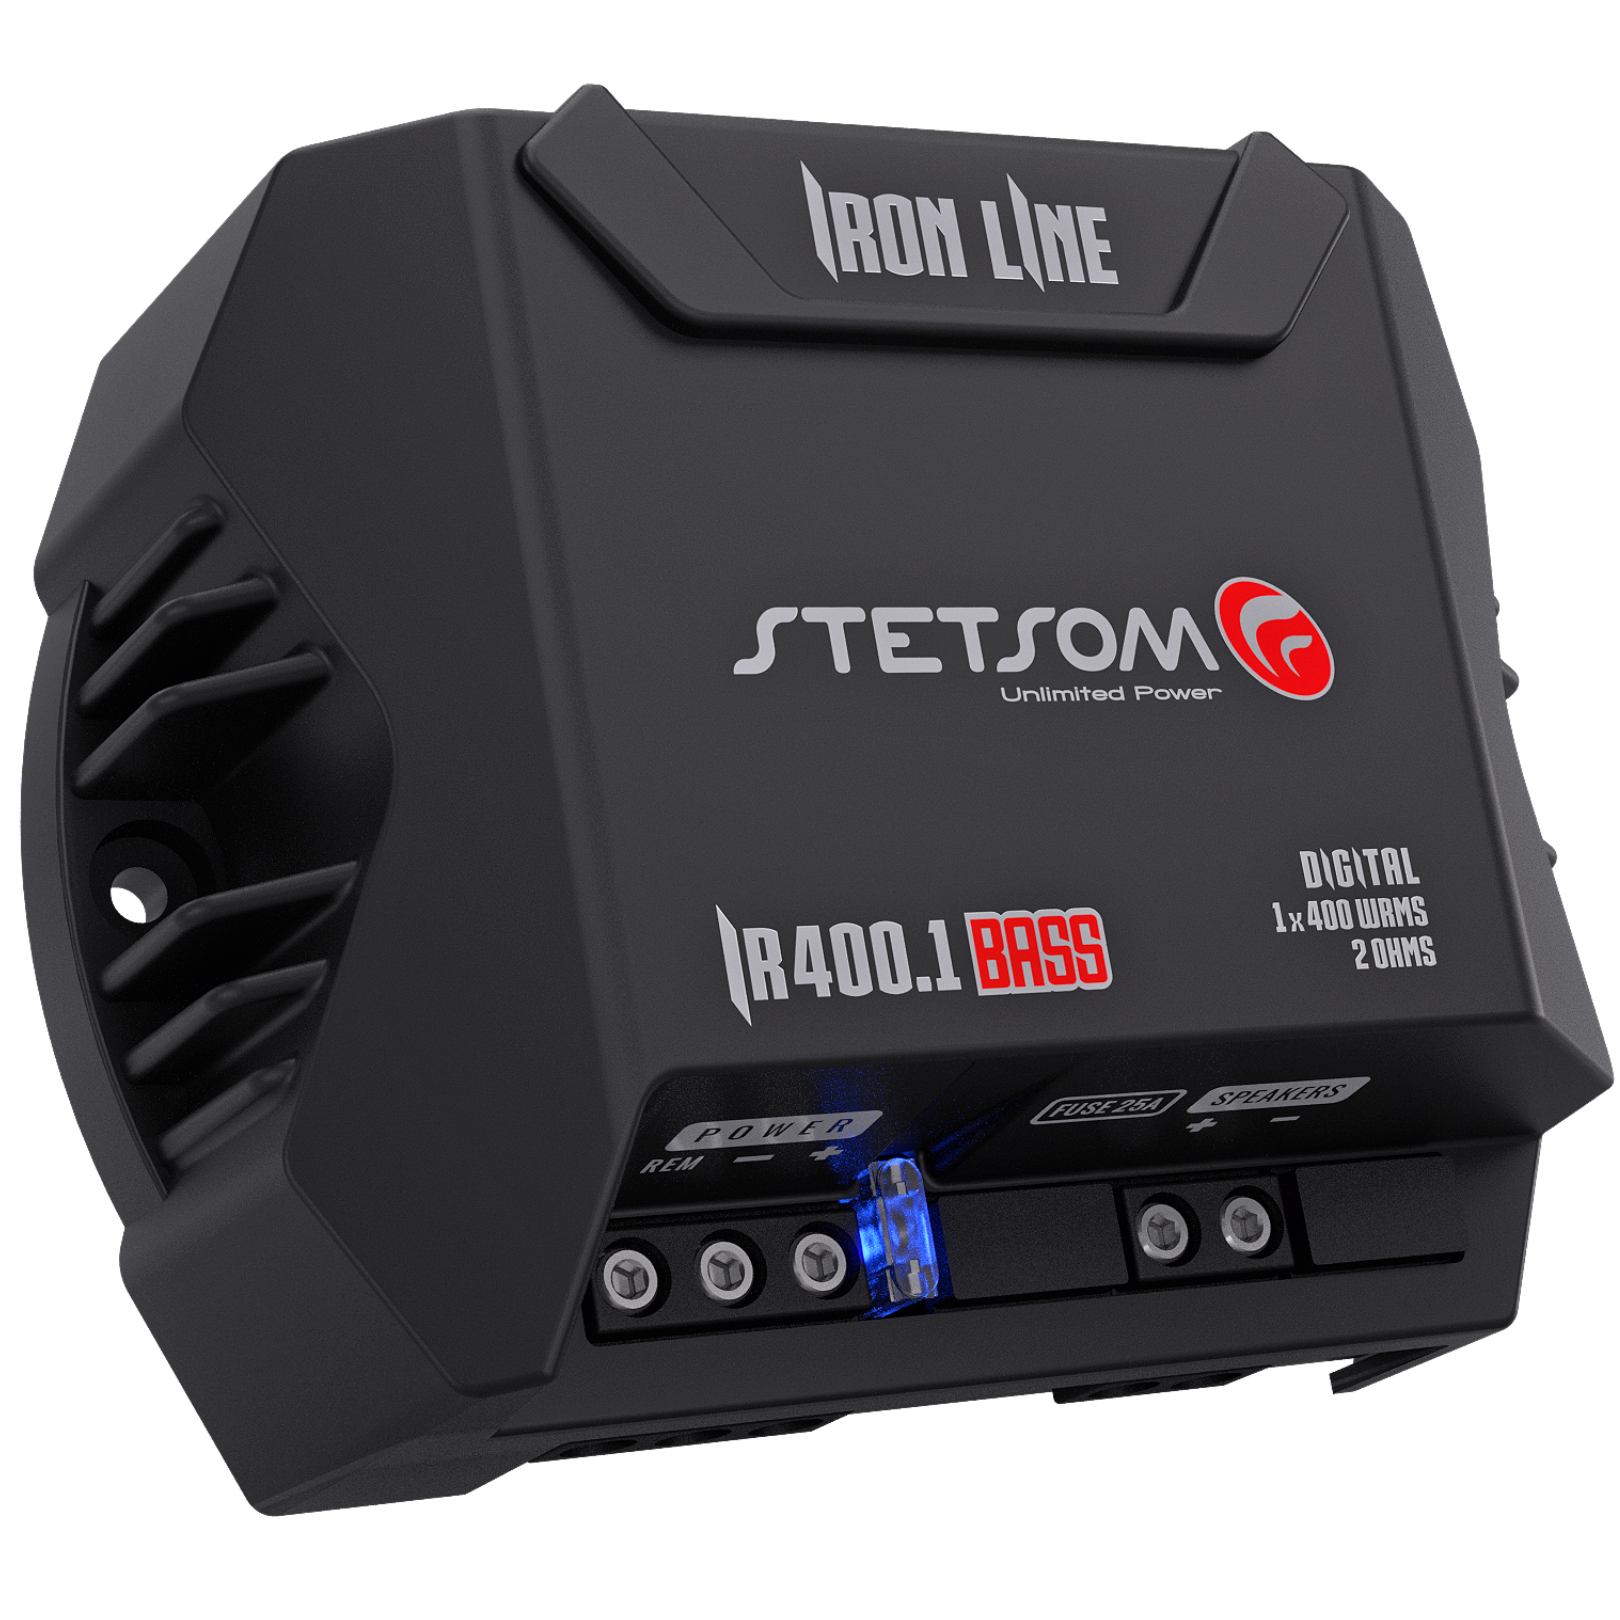 Stetsom IR 400.1 BASS IRON LINE Digital Amplifier, 400 W RMS, 2 Ohm Stable, Subwoofer Sound Quality, Bass Crossover